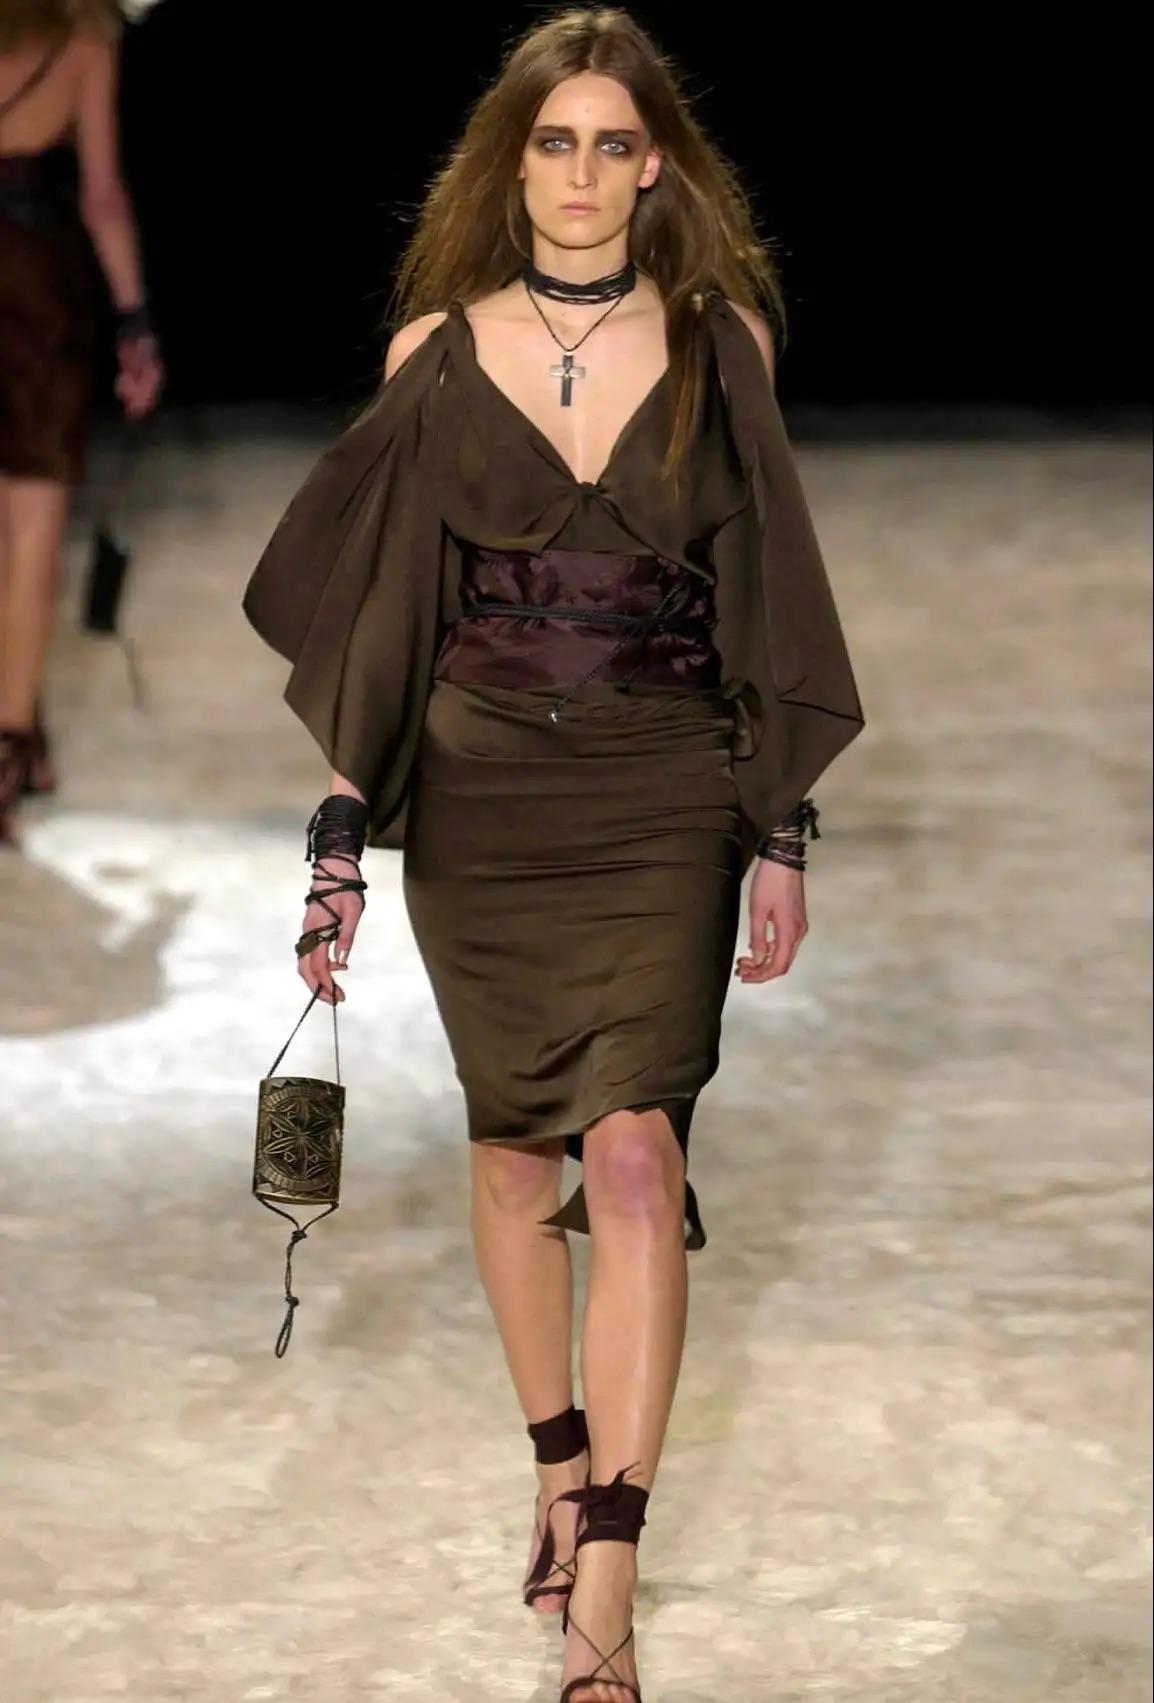 Introducing an incredible brown carved wood Gucci bag by Tom Ford from the Fall/Winter 2002 collection. This gothic and punk-rock-inspired bag made its debut on the season's runway as part of look 29, worn by Anne Catherine Lacroix. This fabulous